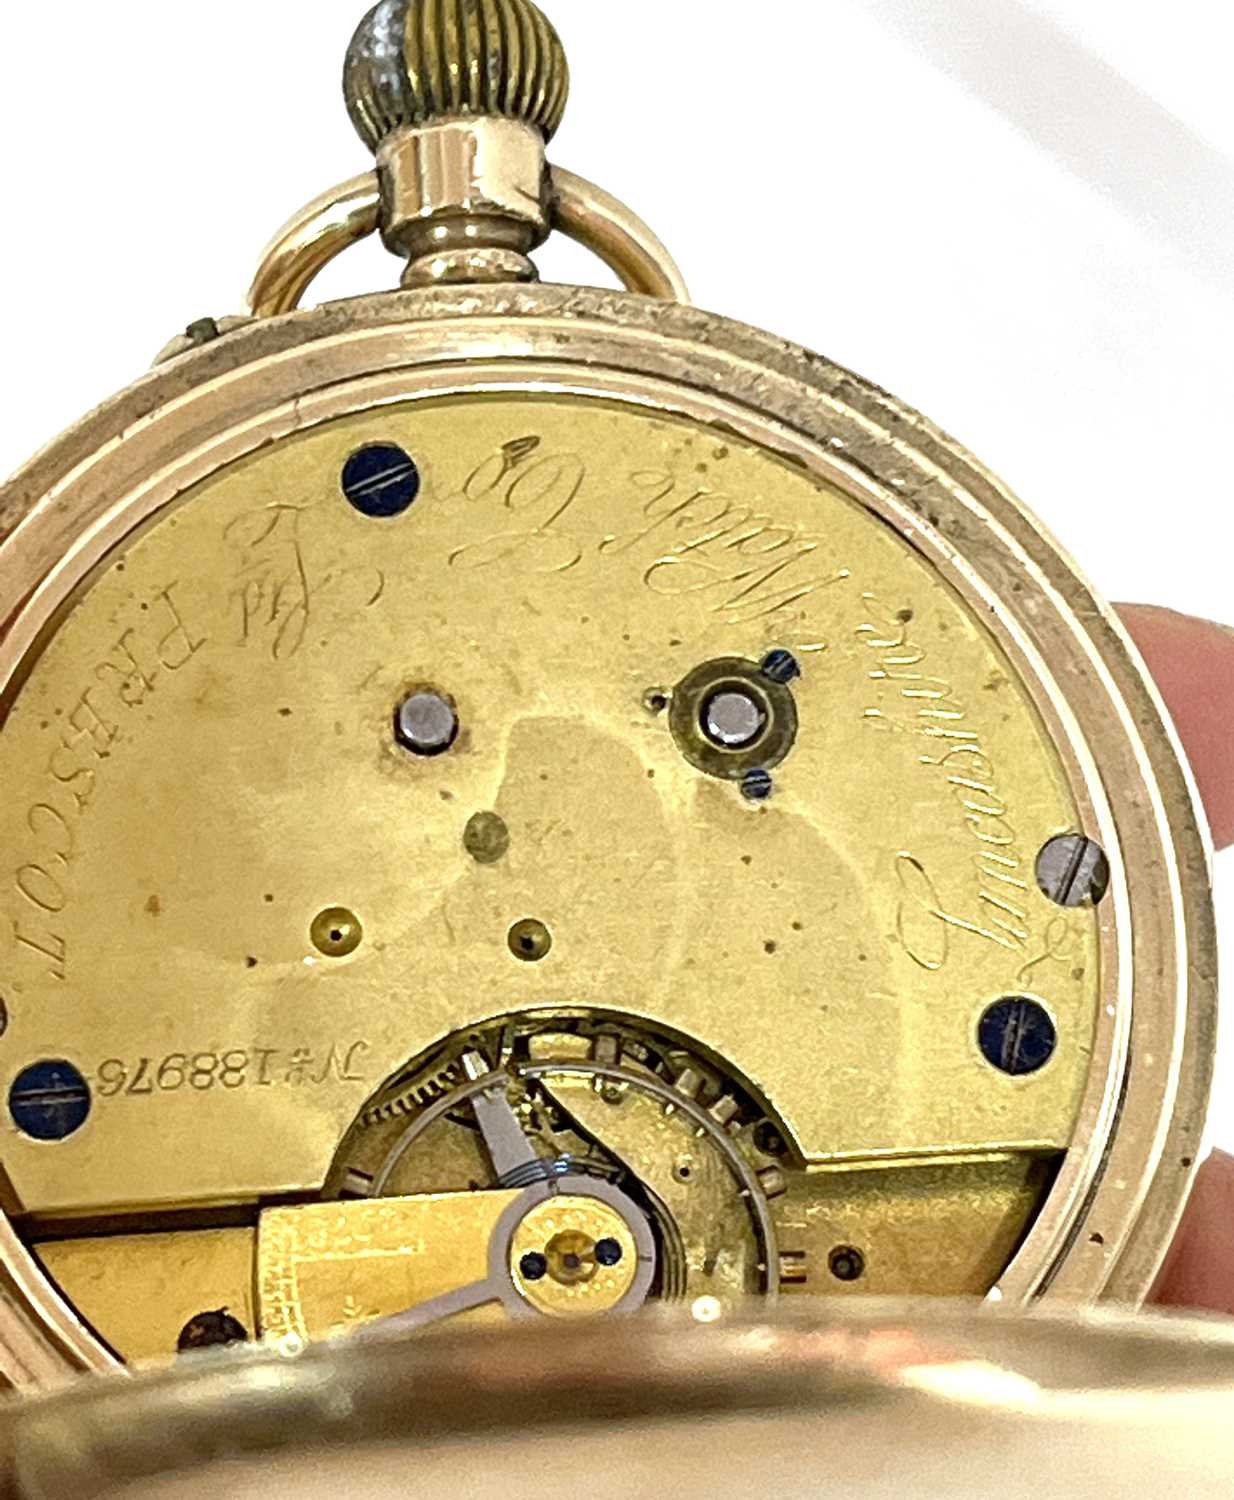 A rolled gold Lancashire Watch Company pocket watch, the watch has a manually crown wound movement - Image 6 of 7